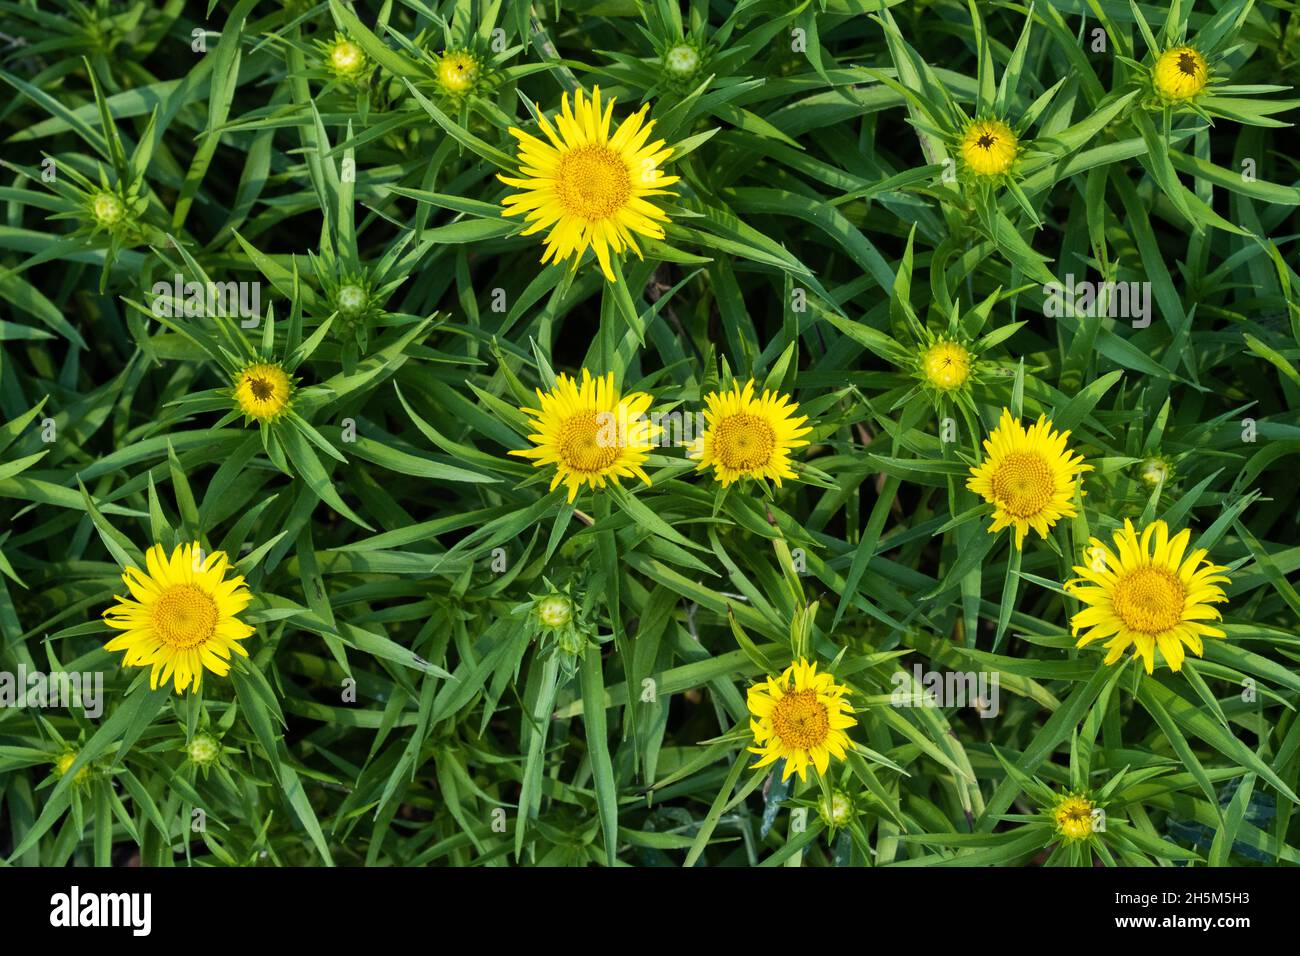 A group of flowering Dwarf golden asters growing in a garden. Stock Photo